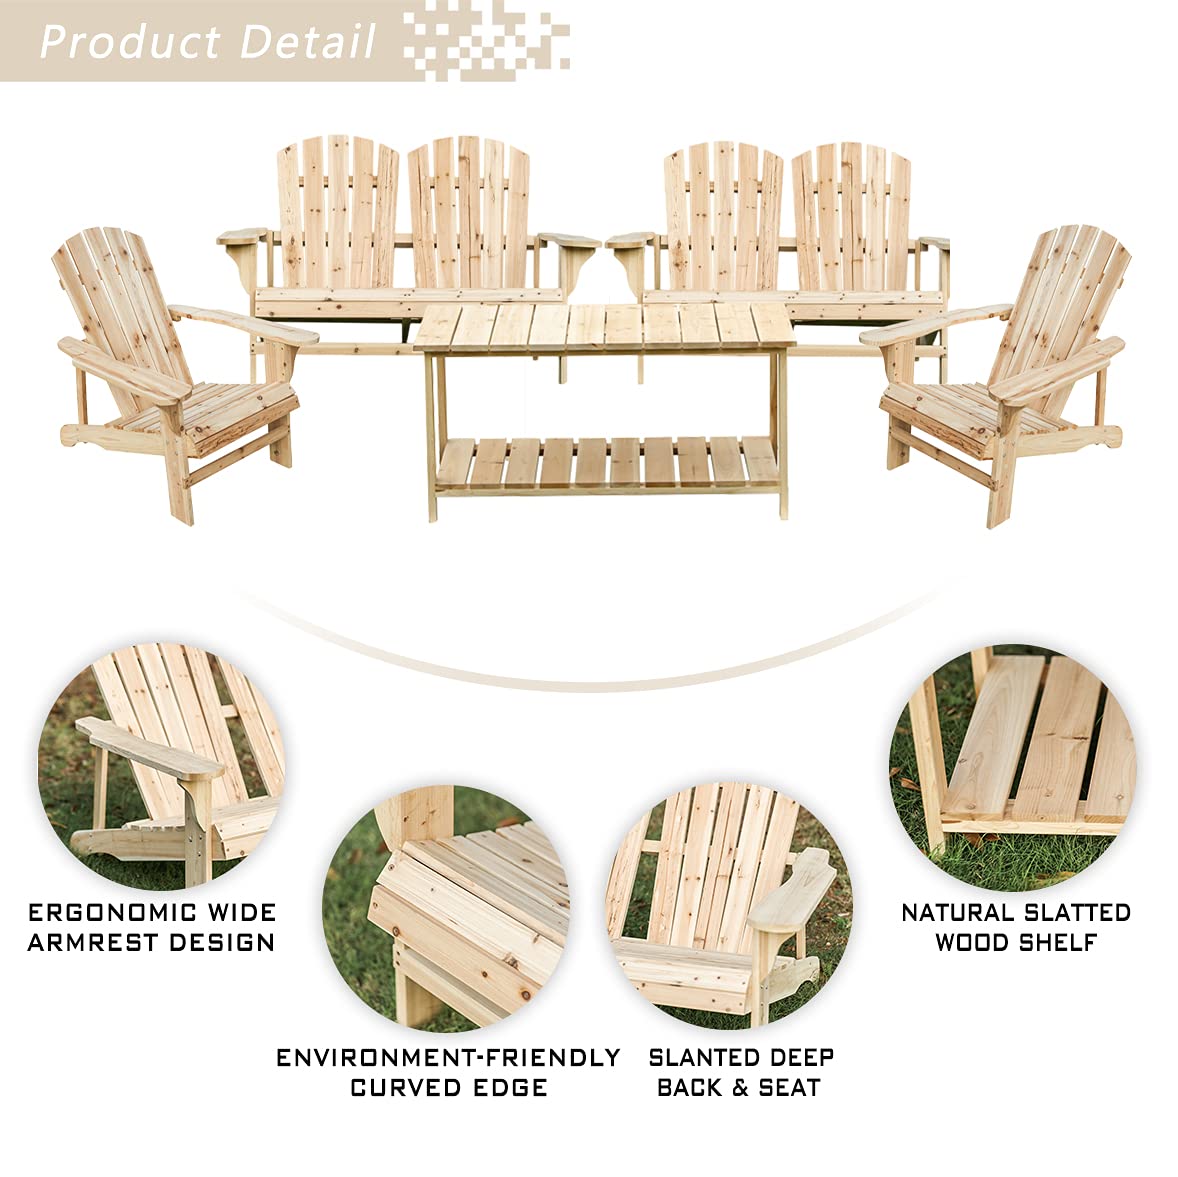 Festival Depot 5 Pieces Outdoor Furniture Patio Conversation Set Wood Adirondack Chairs, Loveseat and Coffee Table for Lawn, Deck, Beach, Backyard, Porch, Balcony, Wooden